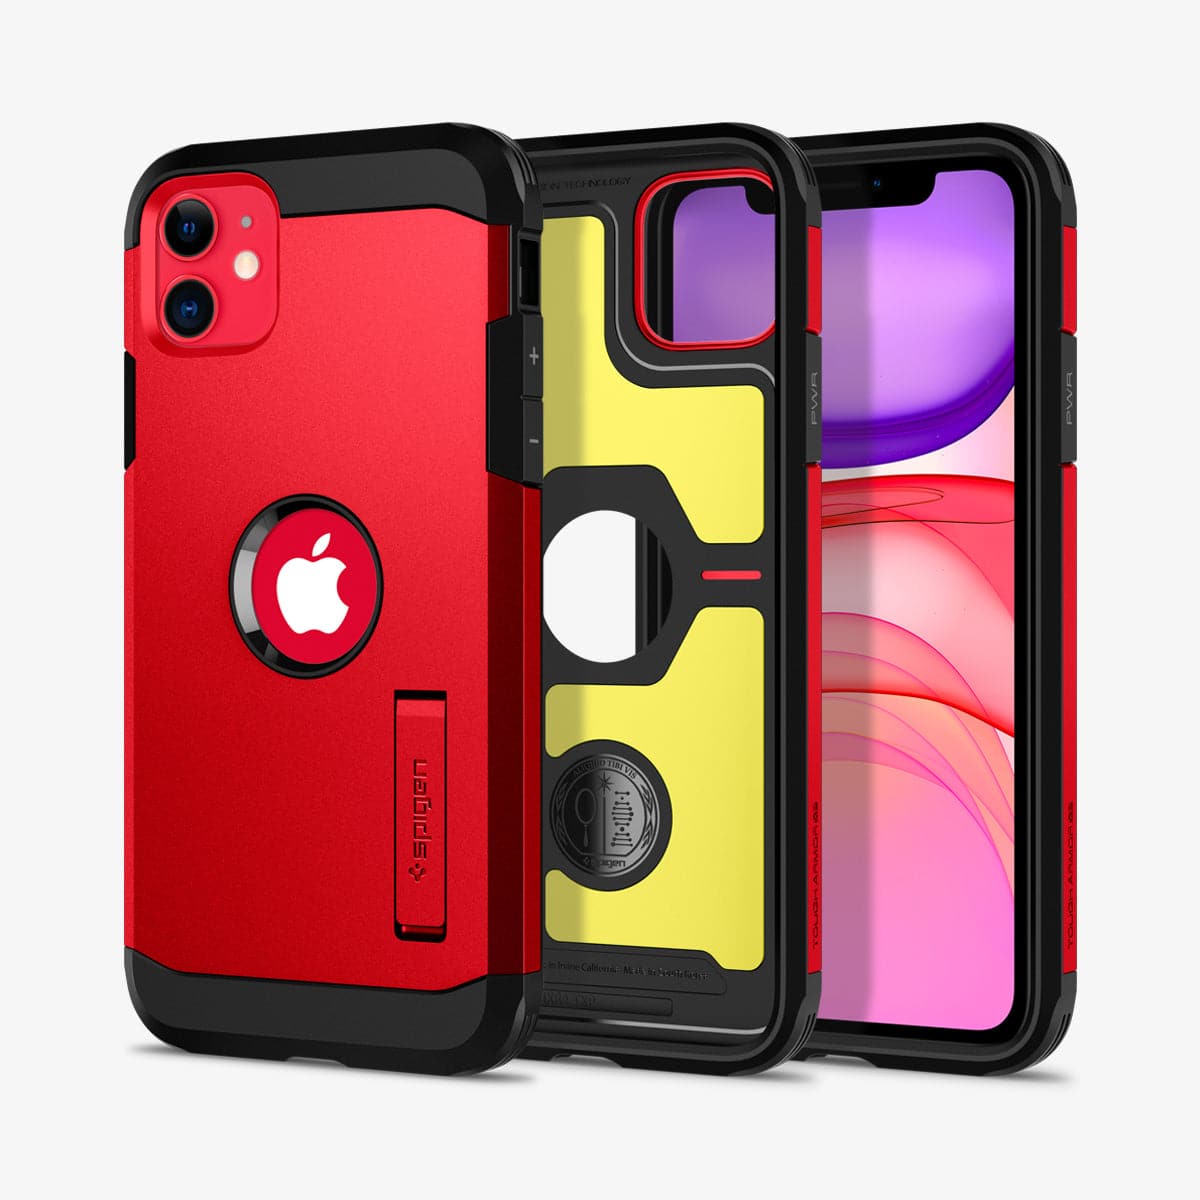 ACS00408 - iPhone 11 Case Tough Armor XP in red showing the back, inside and front